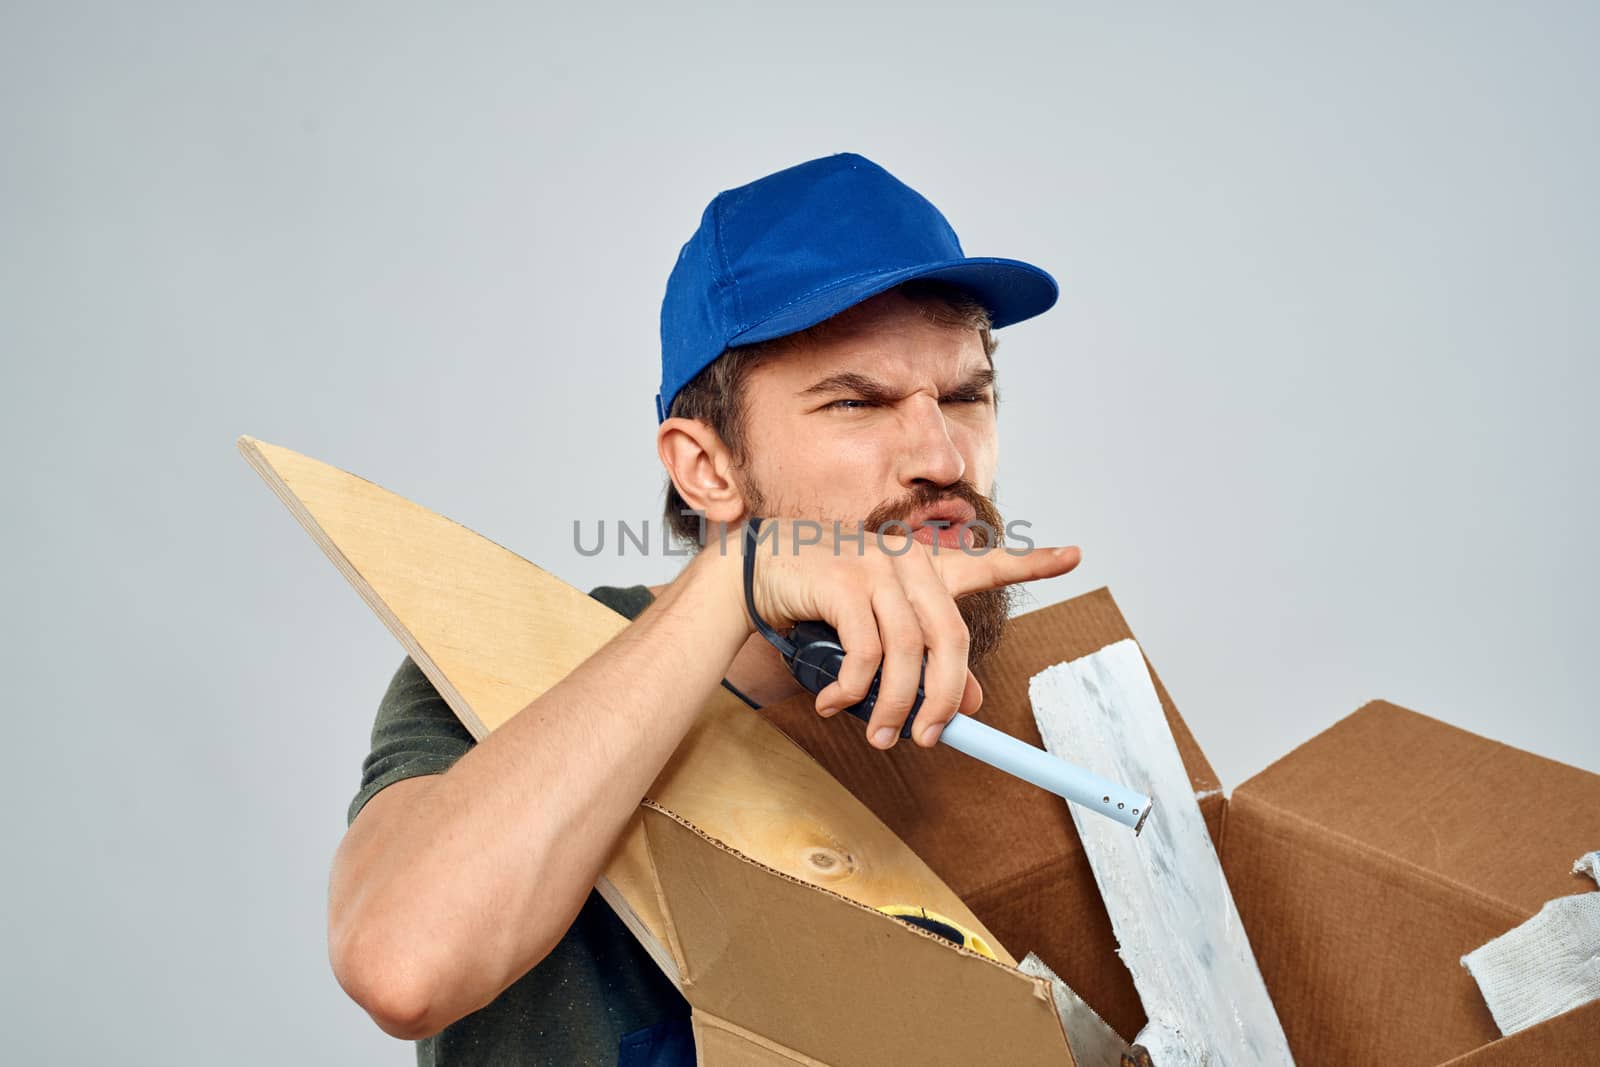 man in work uniform with box in hands tools lifestyle light background by SHOTPRIME